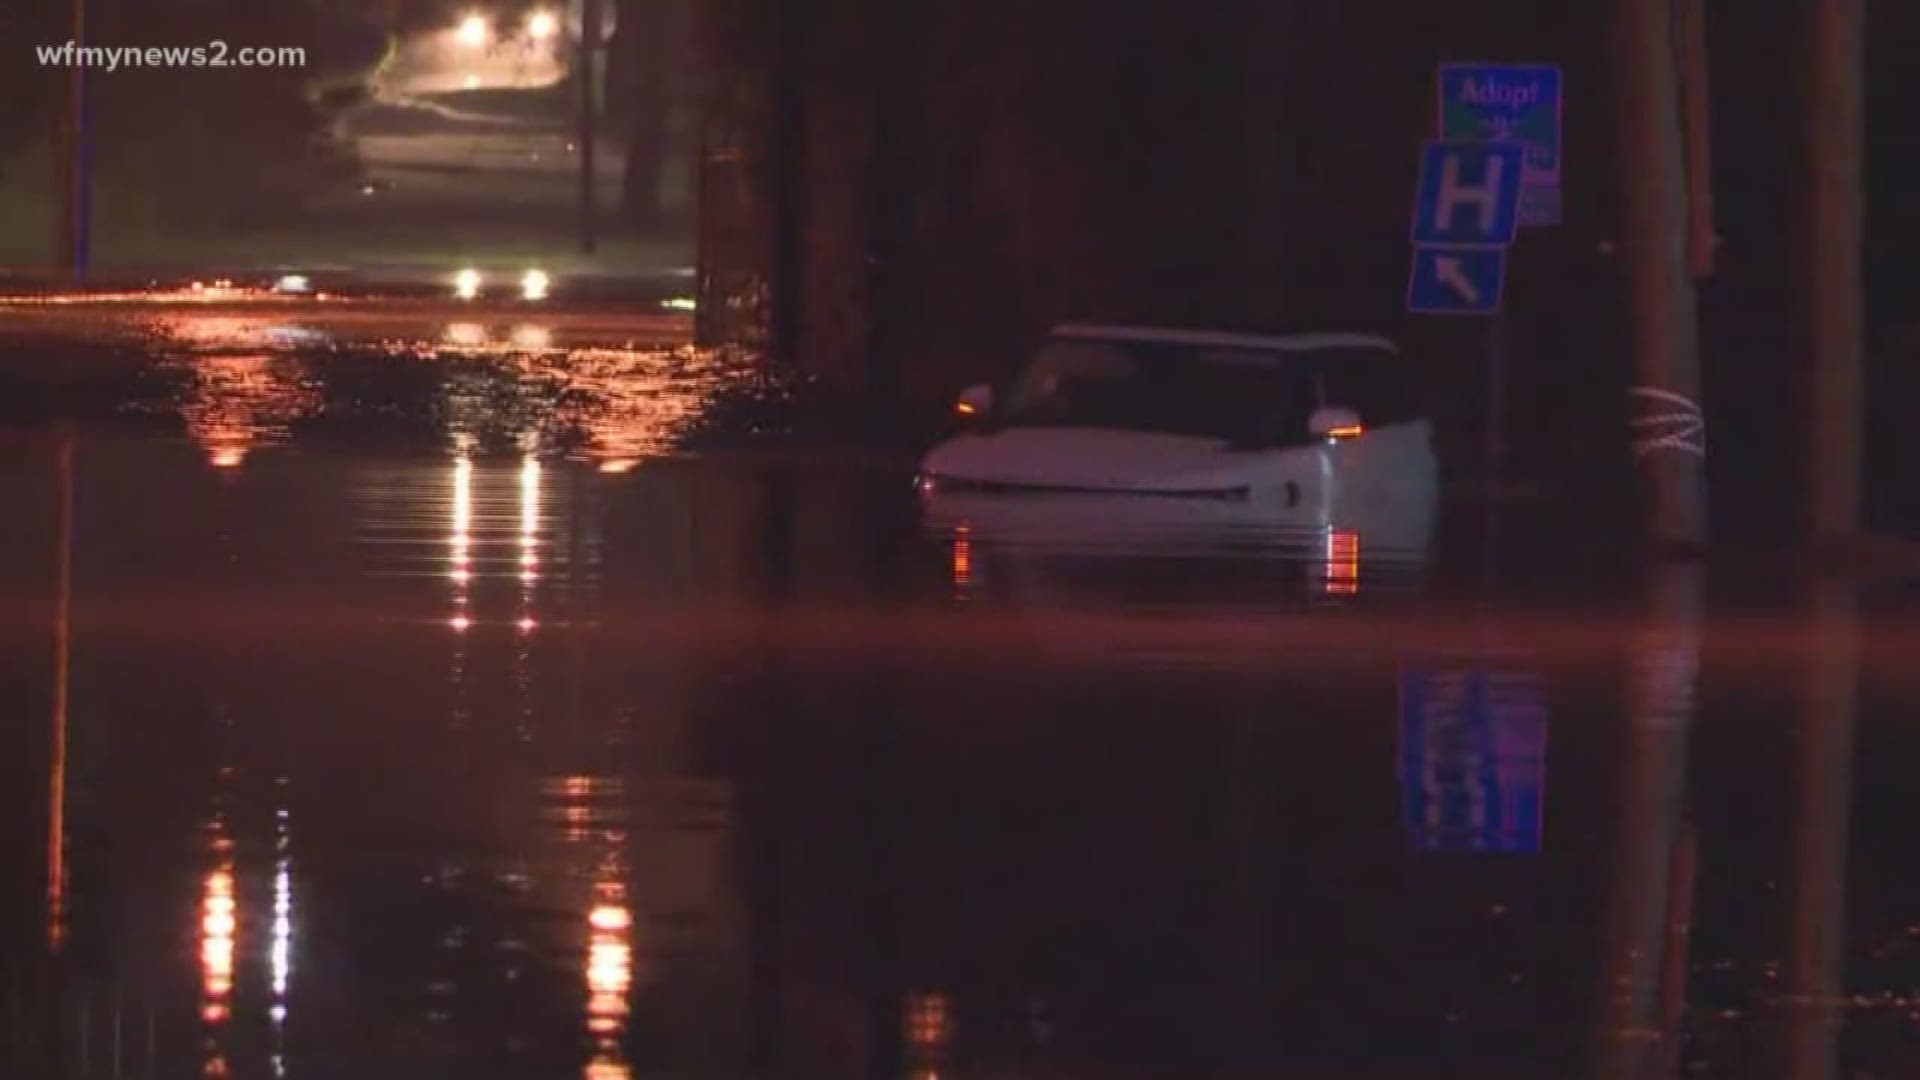 Wednesday night's flash flooding event put several cars under water at Revolution Mill Apartments. The nearby Buffalo Creek rose even higher than it did when Hurricane Florence brought torrential rain to the Triad.